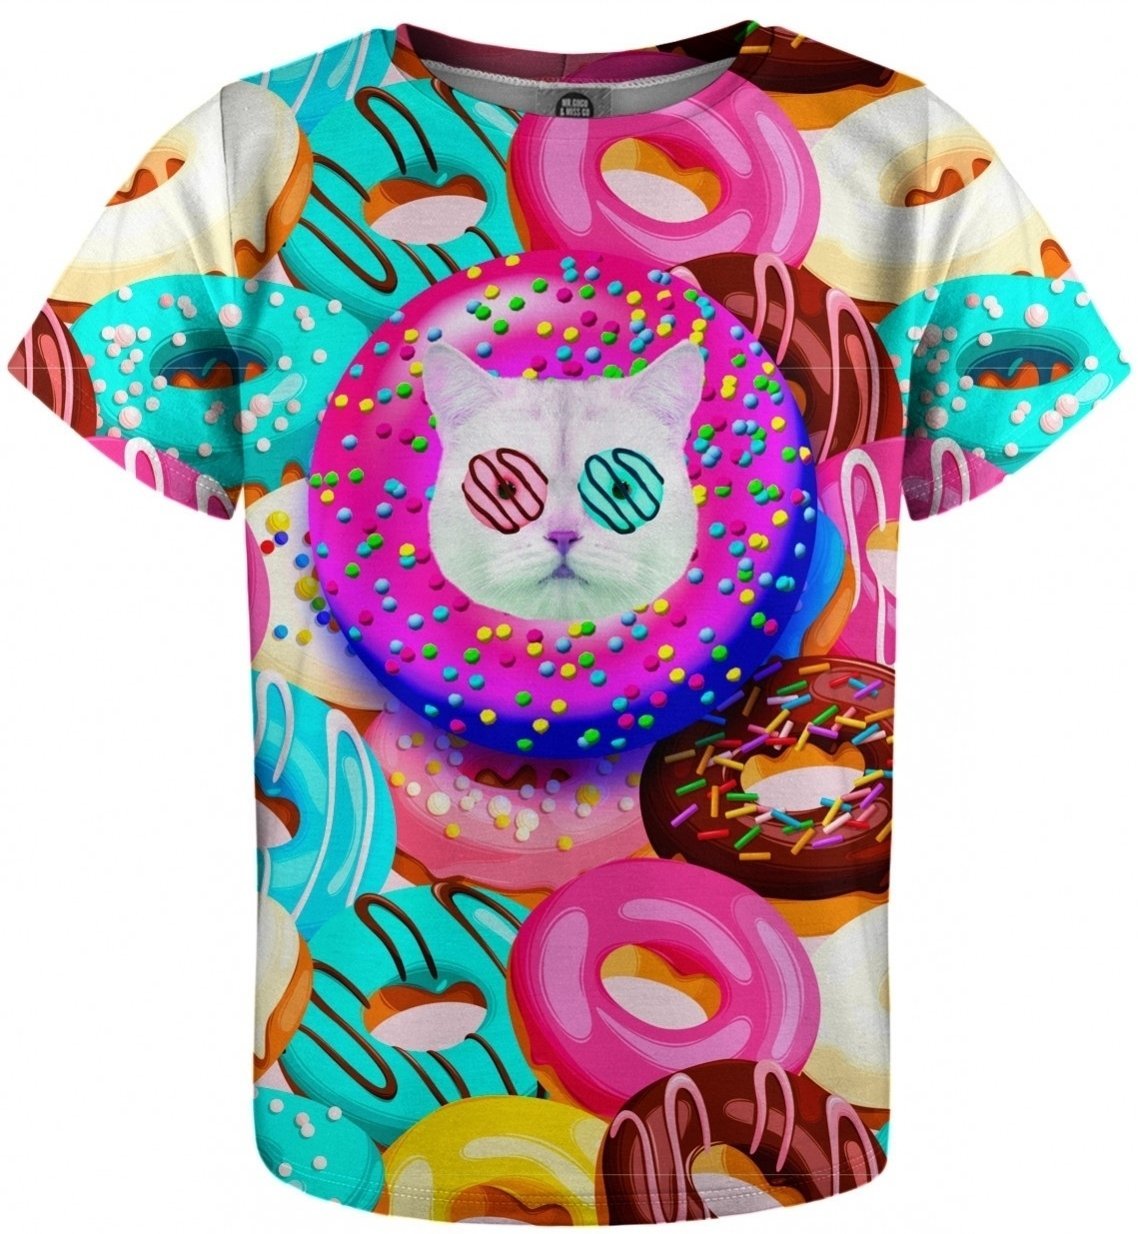 Shirt Mr. Gugu and Miss Go Shirt Donut Cat 4 - 6 Y